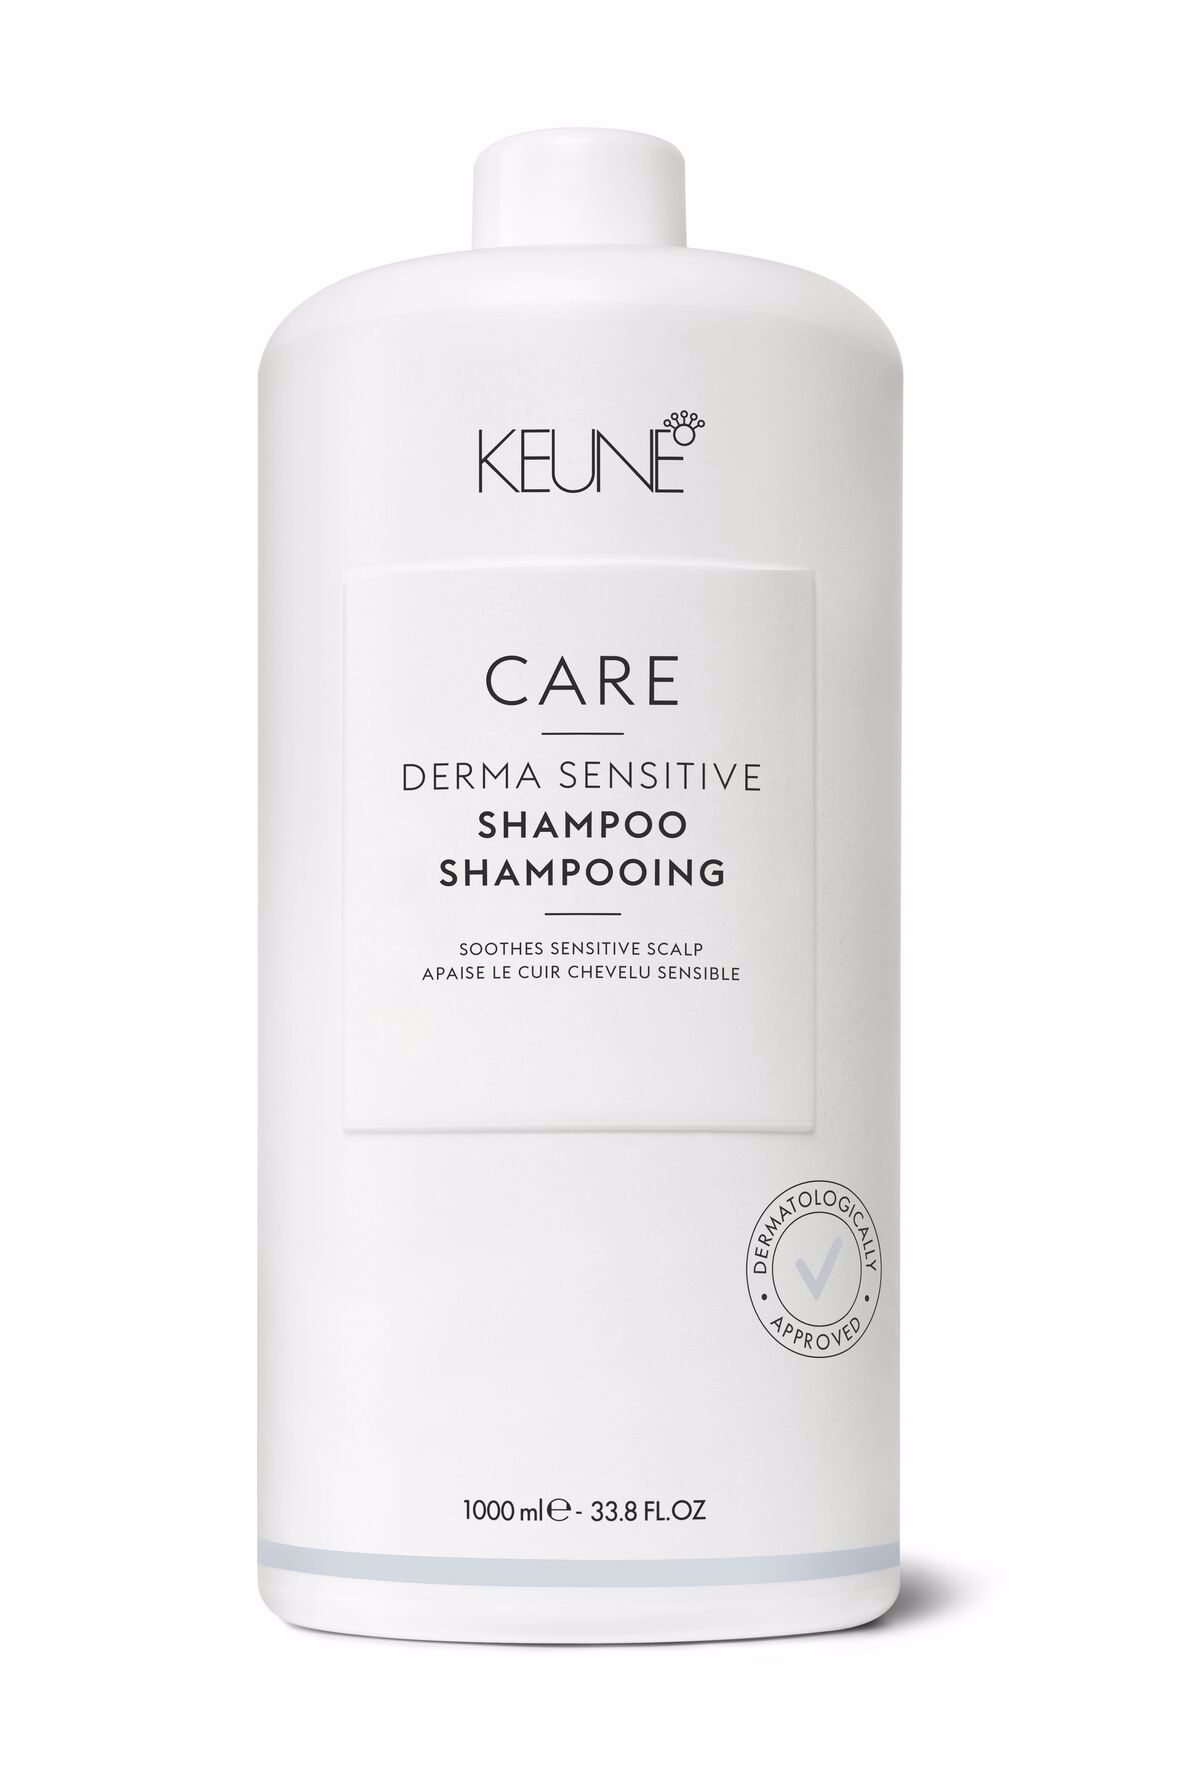 Do you have a sensitive scalp, redness, and itching? Try CARE Derma Sensitive Shampoo. Free from sulfates, alcohol, and added colors. For a calmed scalp and healthy hair. On online hair shop keune.ch.